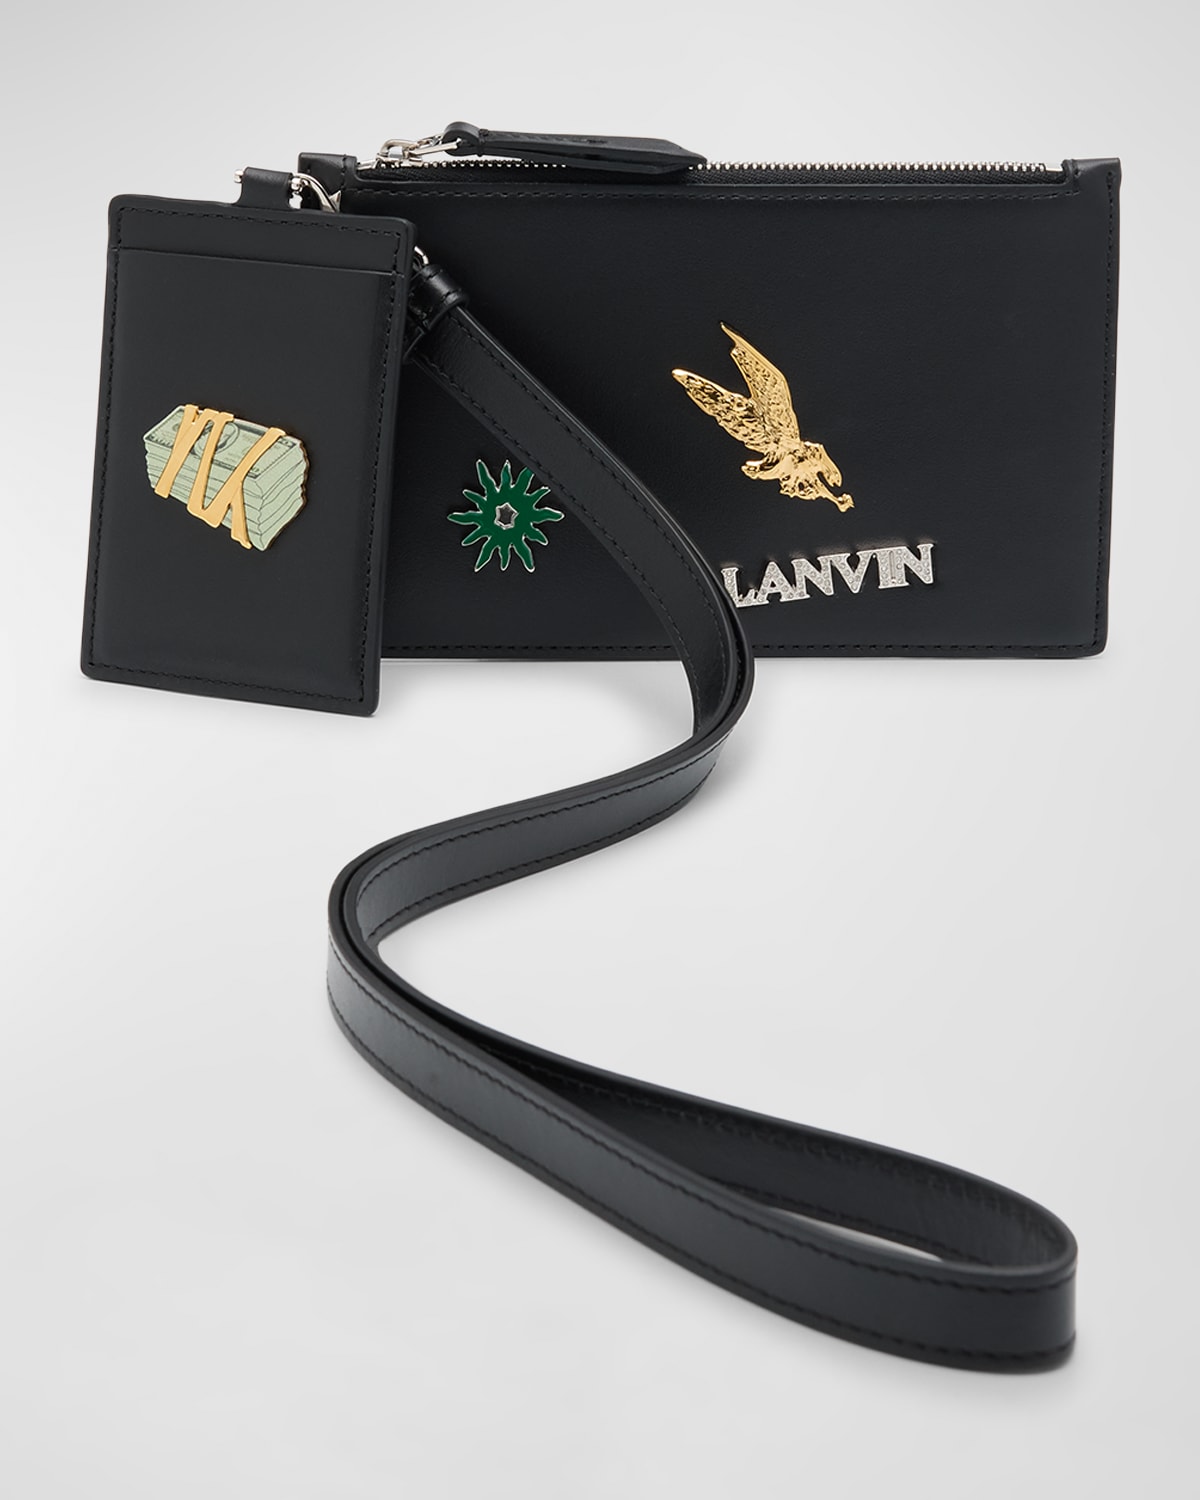 Lanvin Men's Leather Double Pouch With Studs In 10s1 - Black/multico